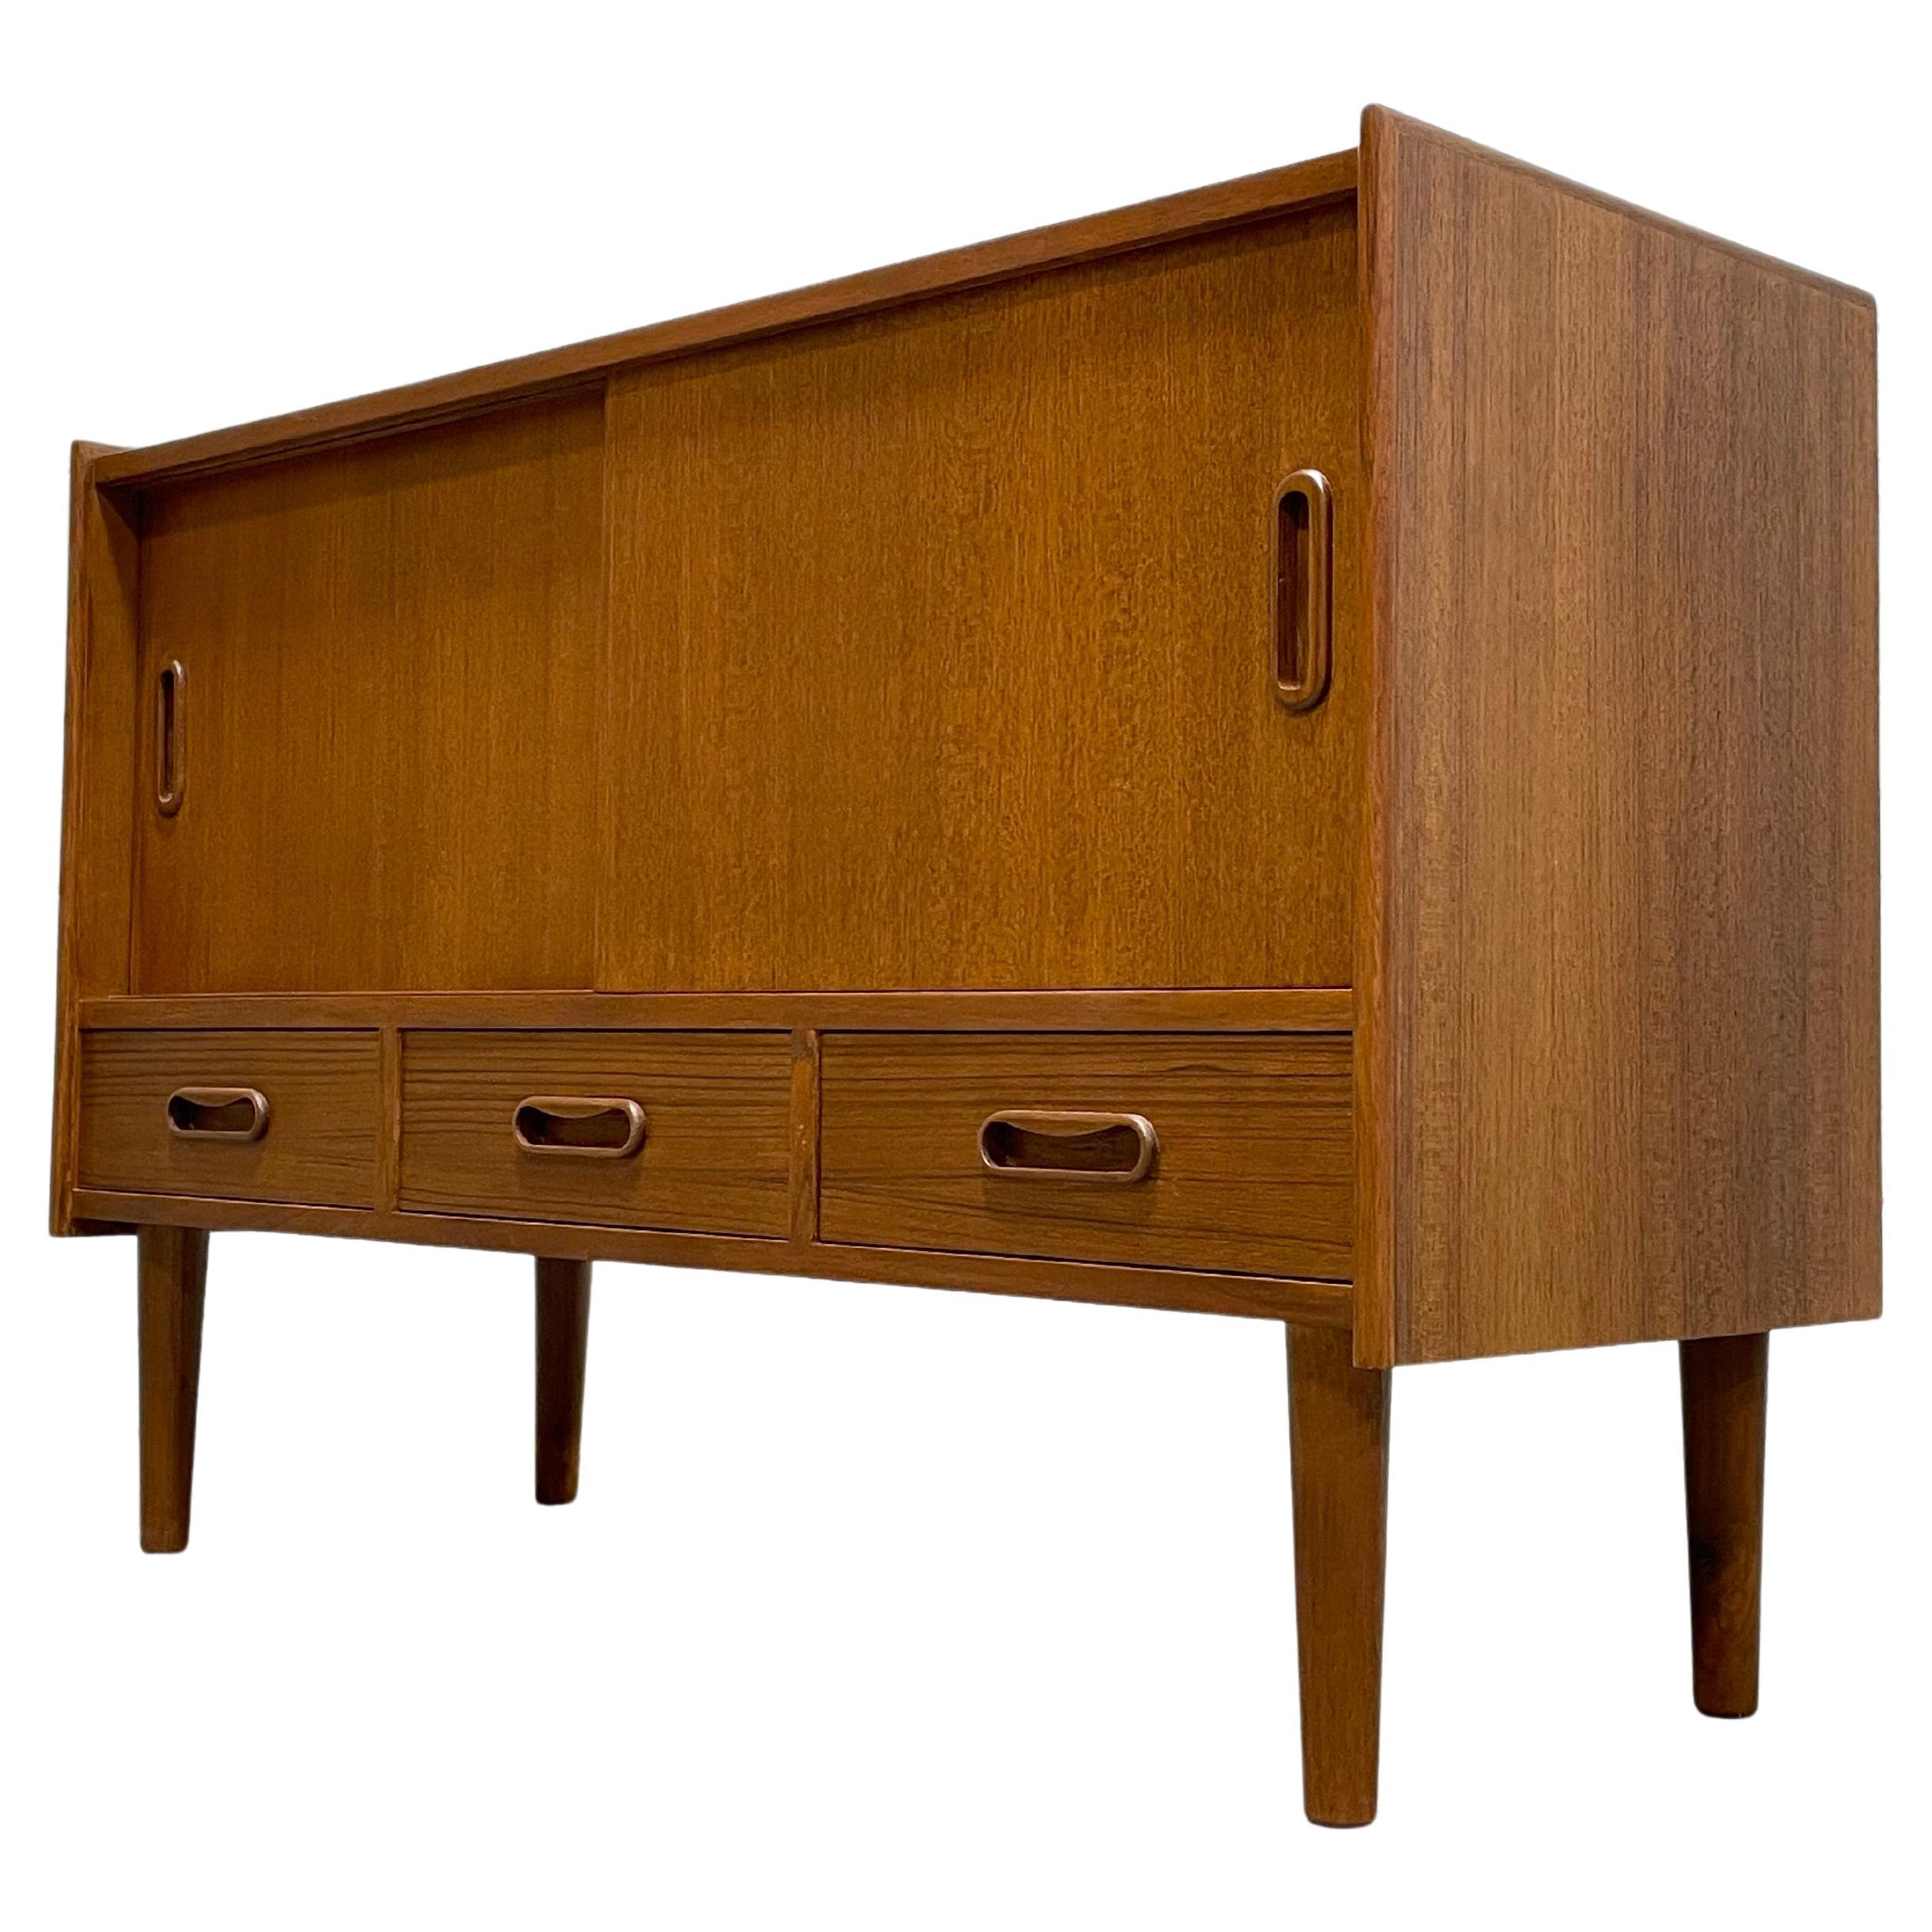 Taille de l'article Mid Century MODERN Teck Jr. CREDENZA / Buffet / Media Stand